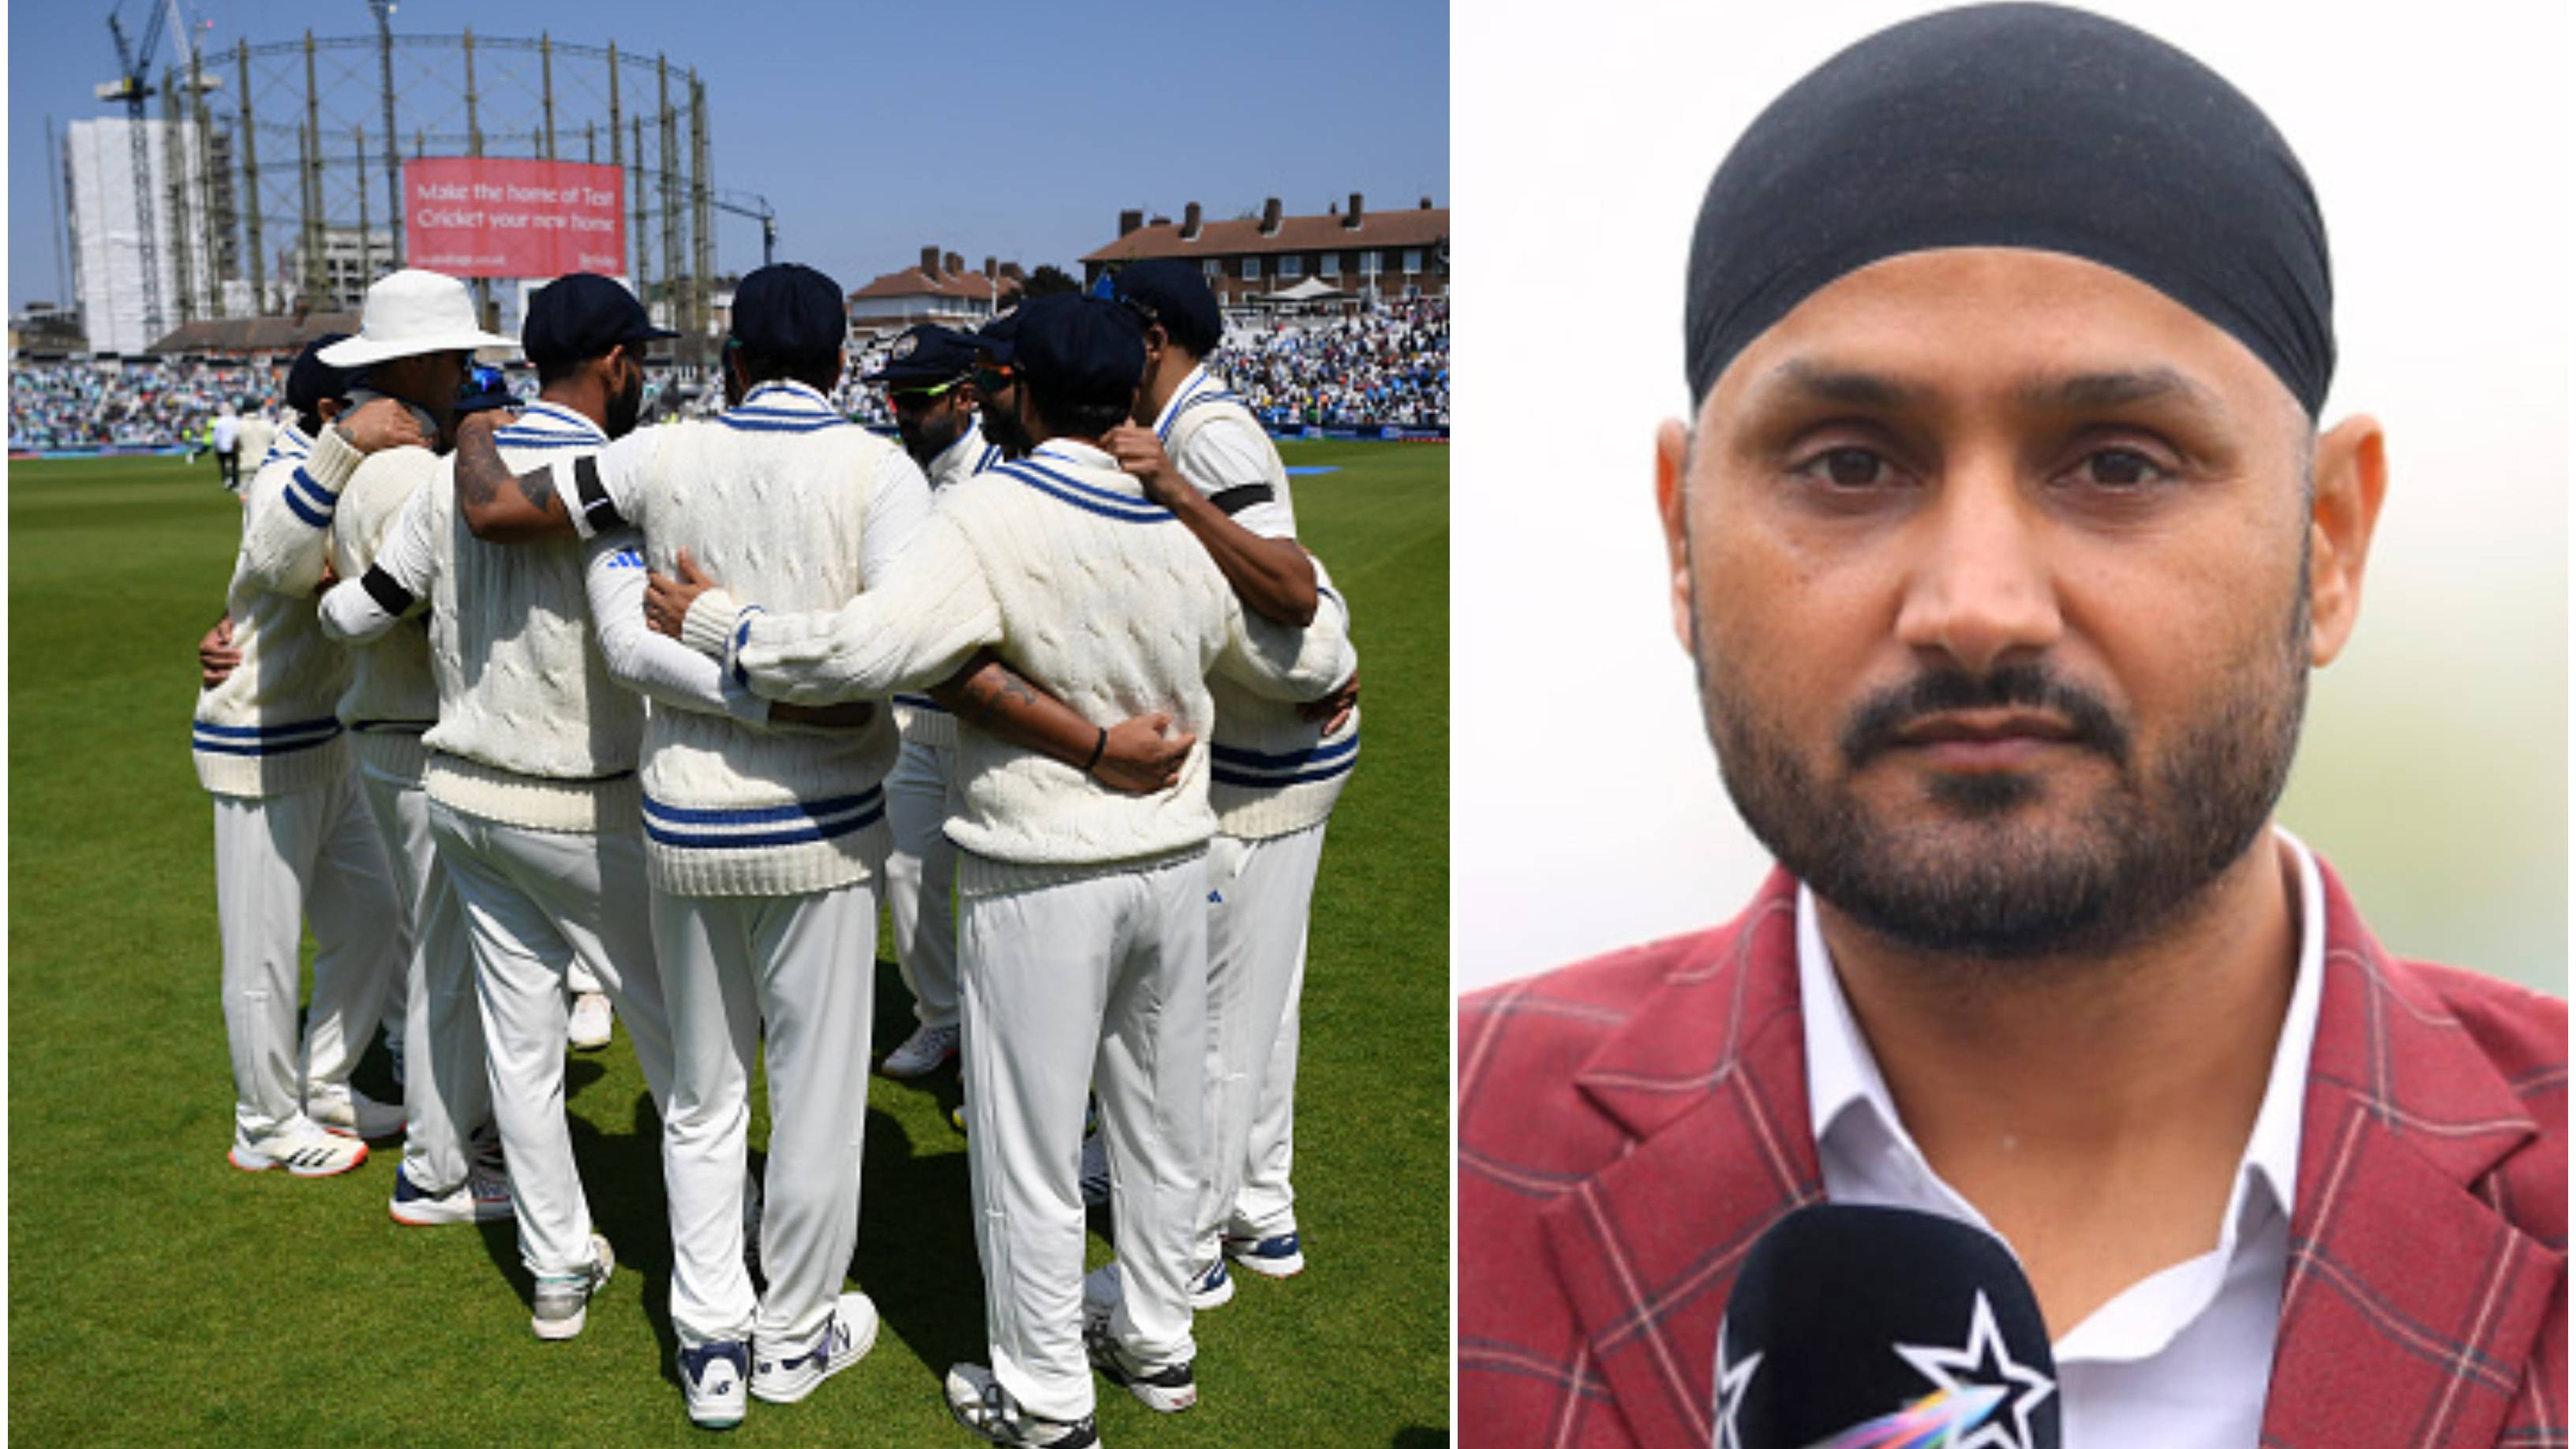 “Oval is perhaps the best pitch to bat on,” Harbhajan backs India to fight back despite tough outing on Day 1 of WTC final